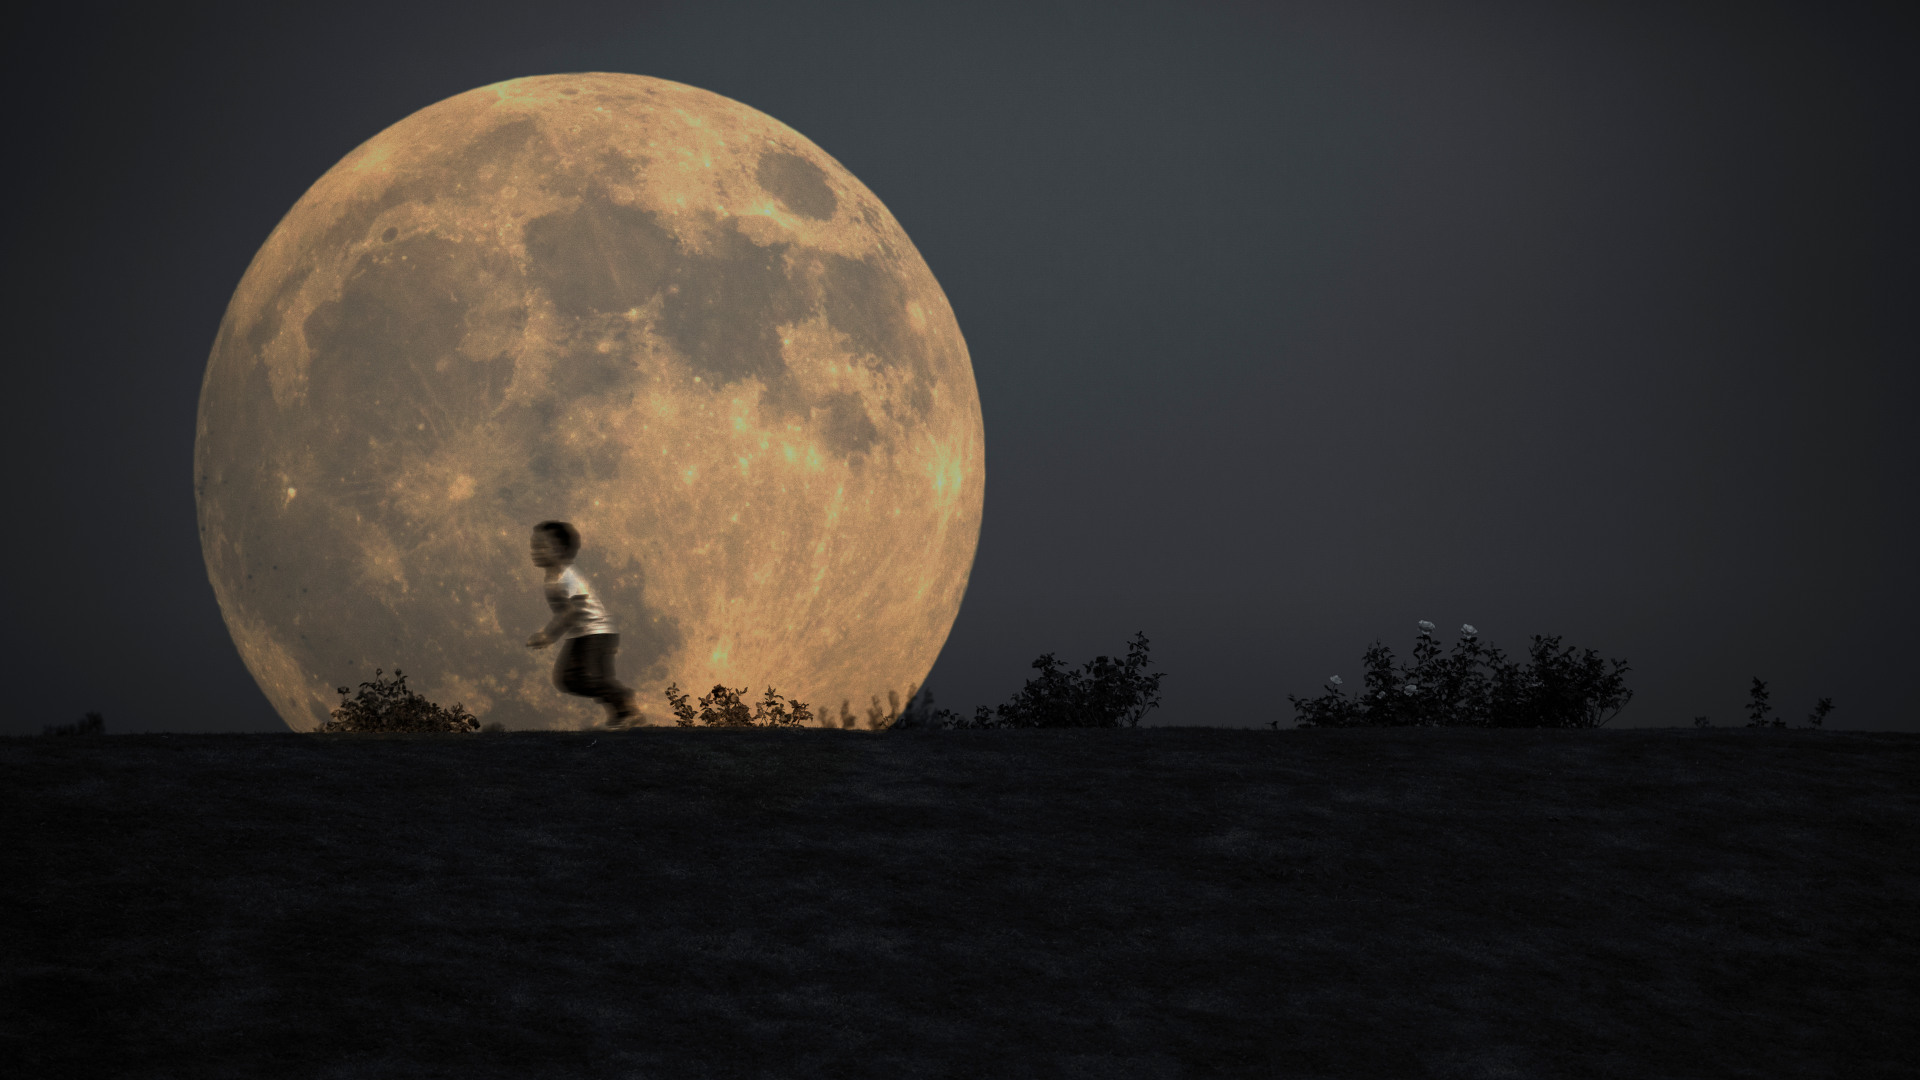 Silhouette of a young boy running in front of the full moon